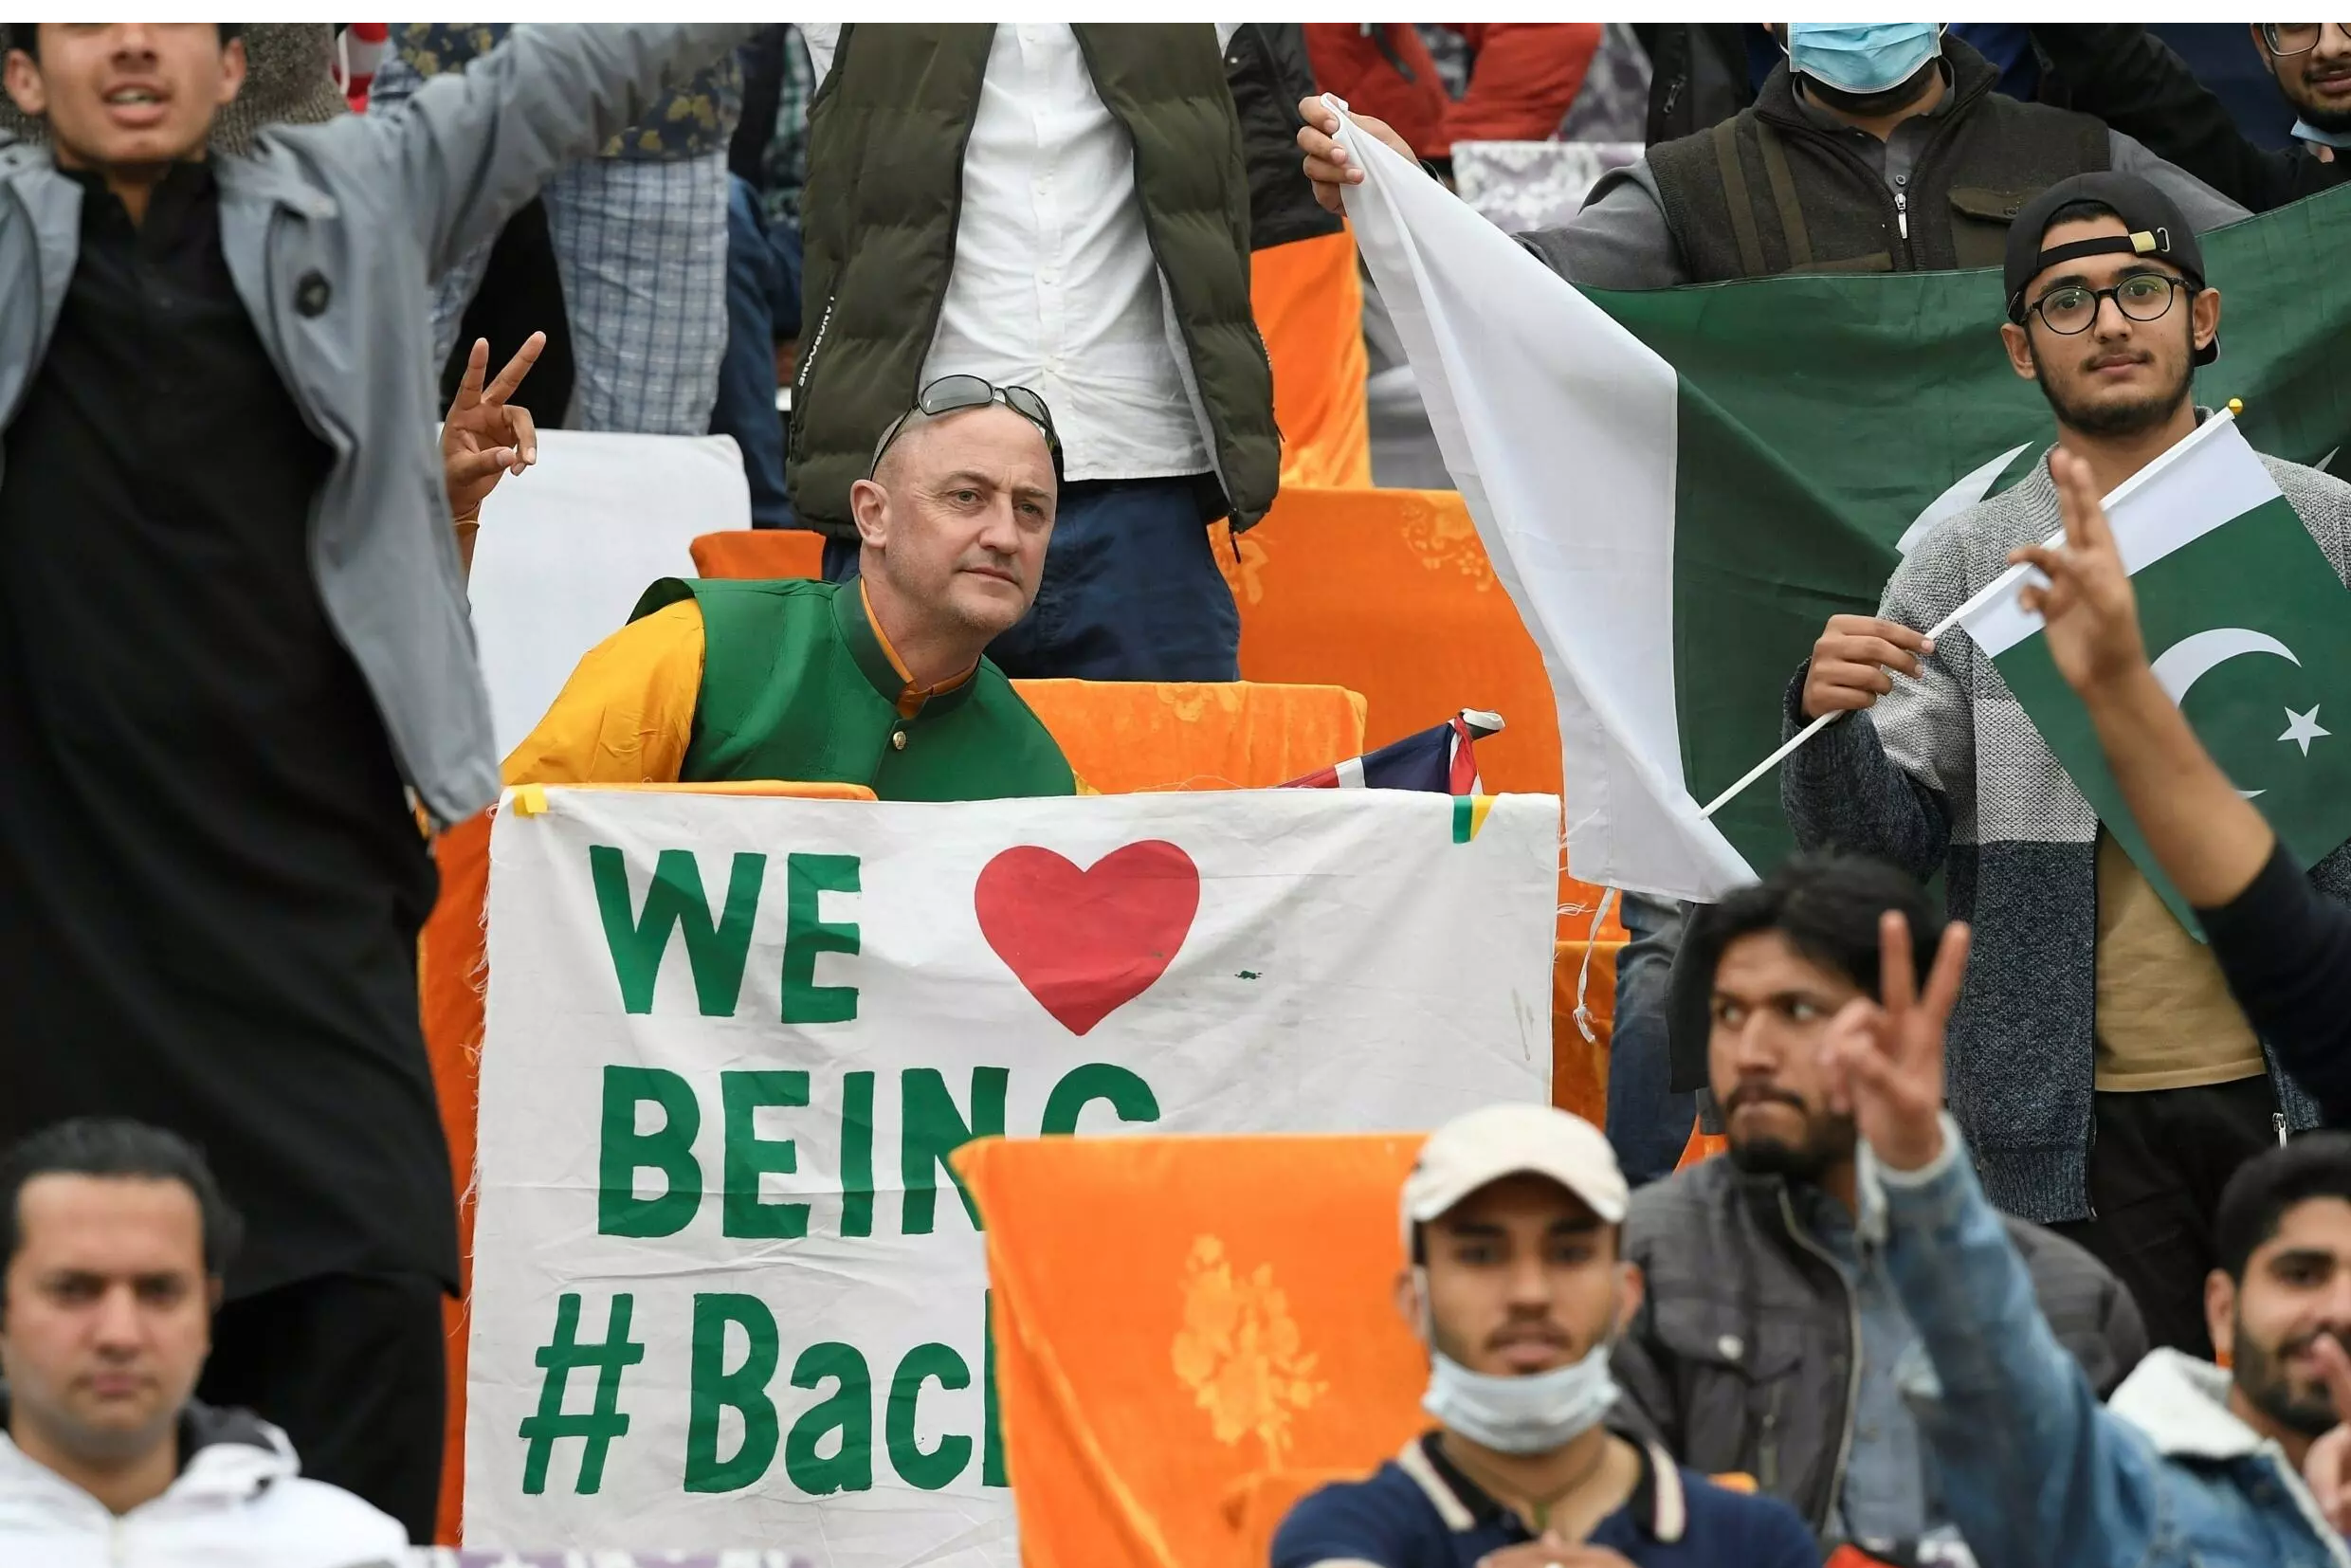 Loving being back: Australian cricket fan Luke Gillian sends a message from the stands during the first Test in Rawalpindi. AFP